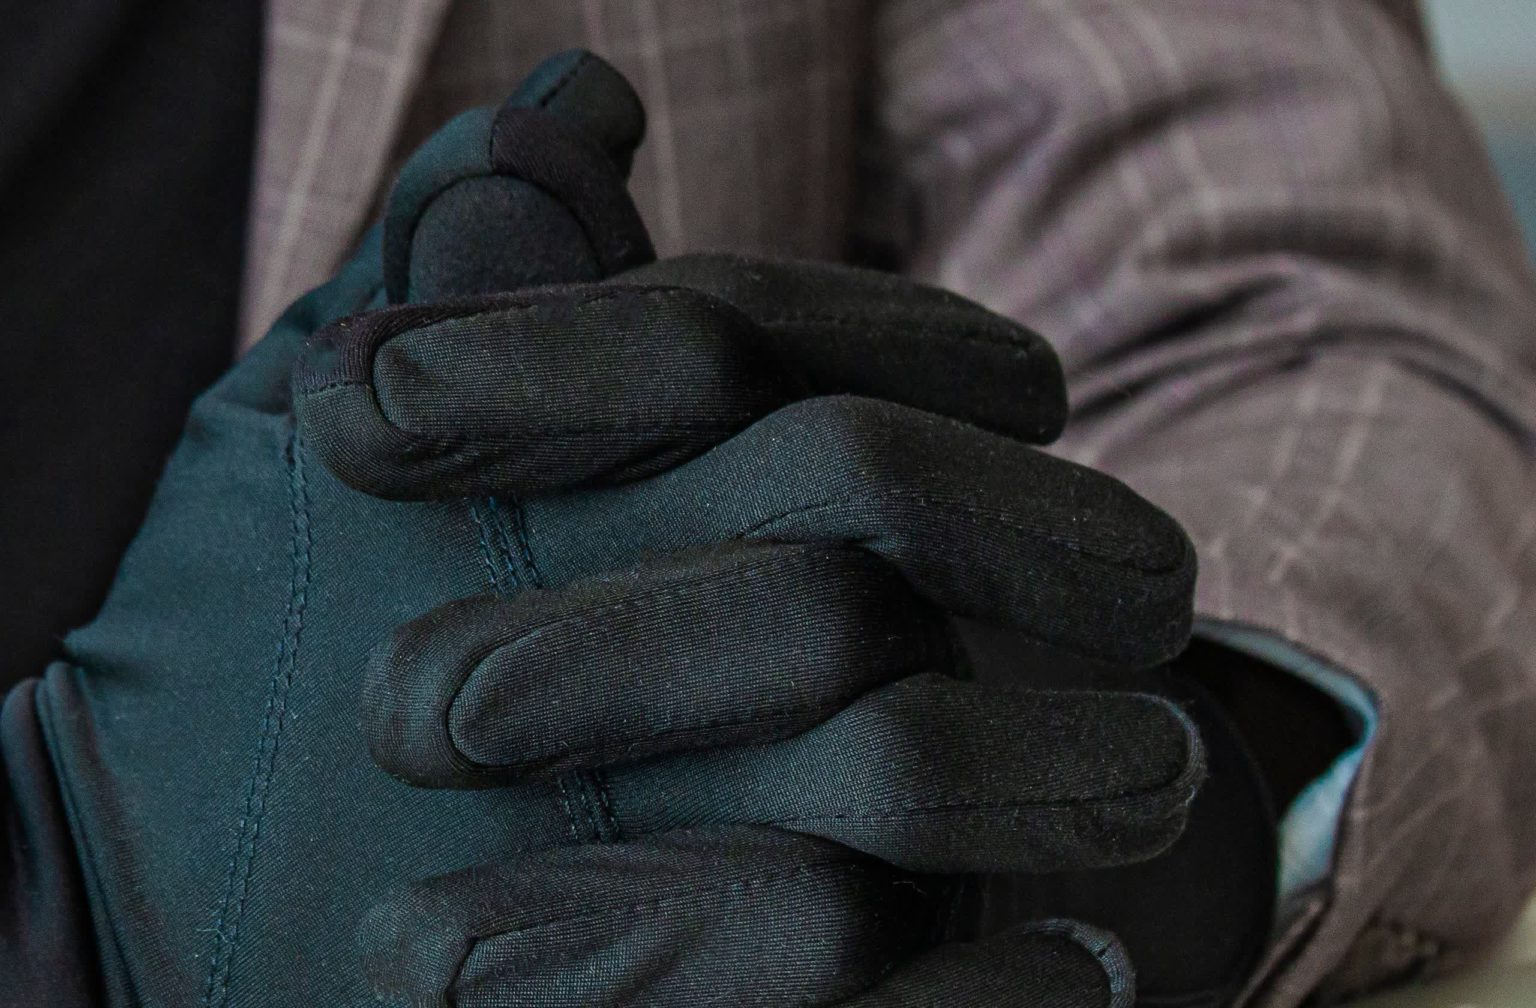 Smart gloves could use haptic feedback to teach physical skills